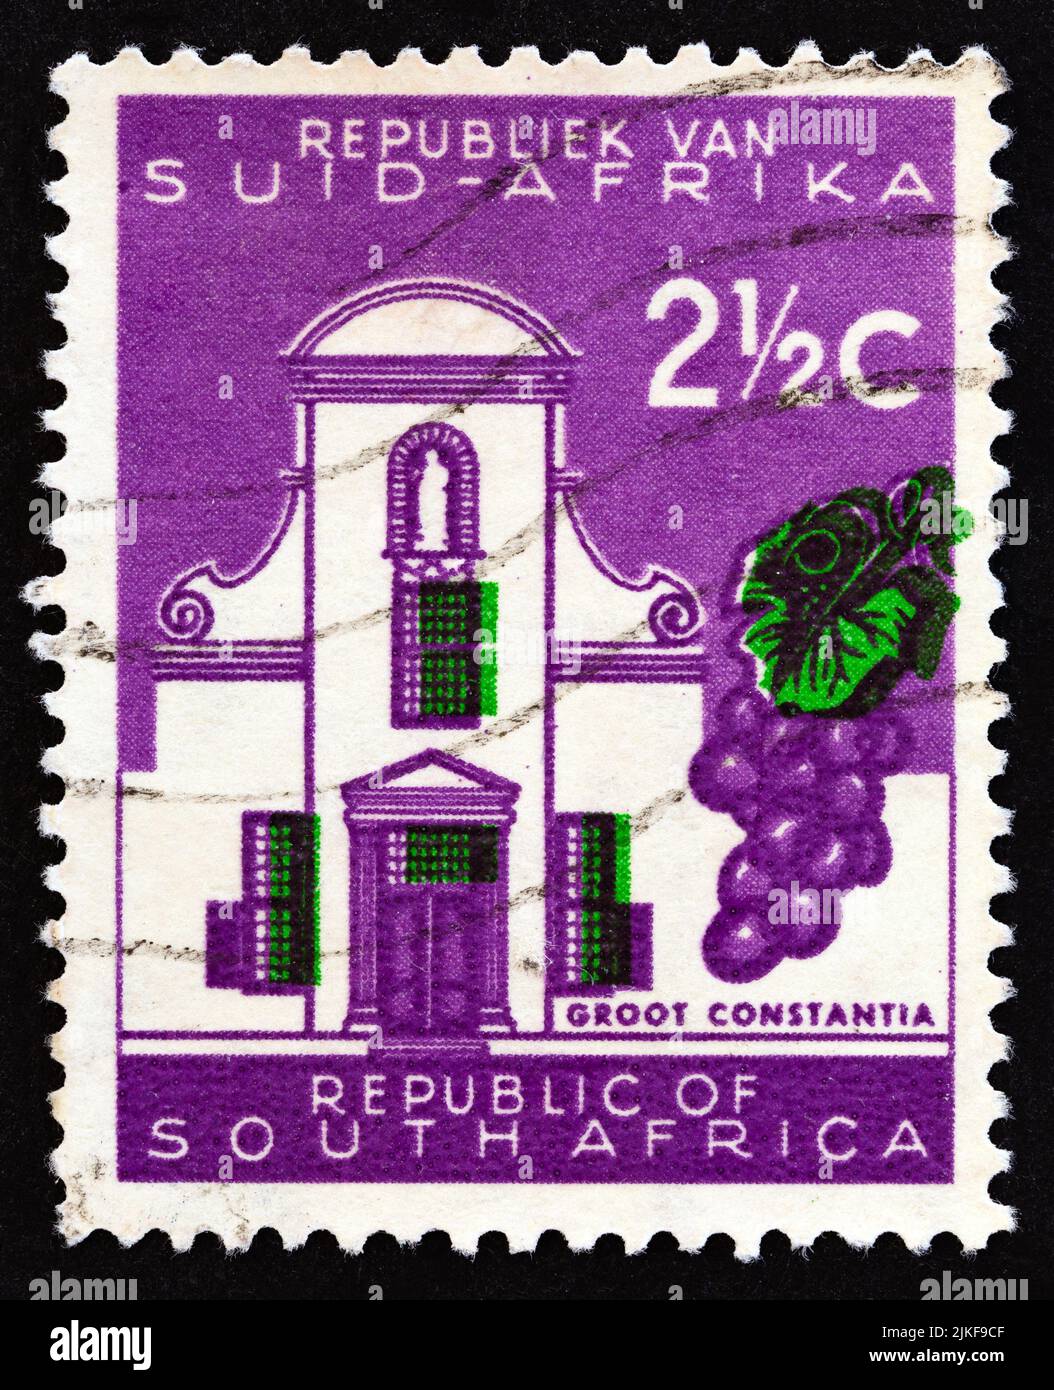 SOUTH AFRICA - CIRCA 1961: A stamp printed in South Africa shows Groot Constantia, circa 1961. Stock Photo